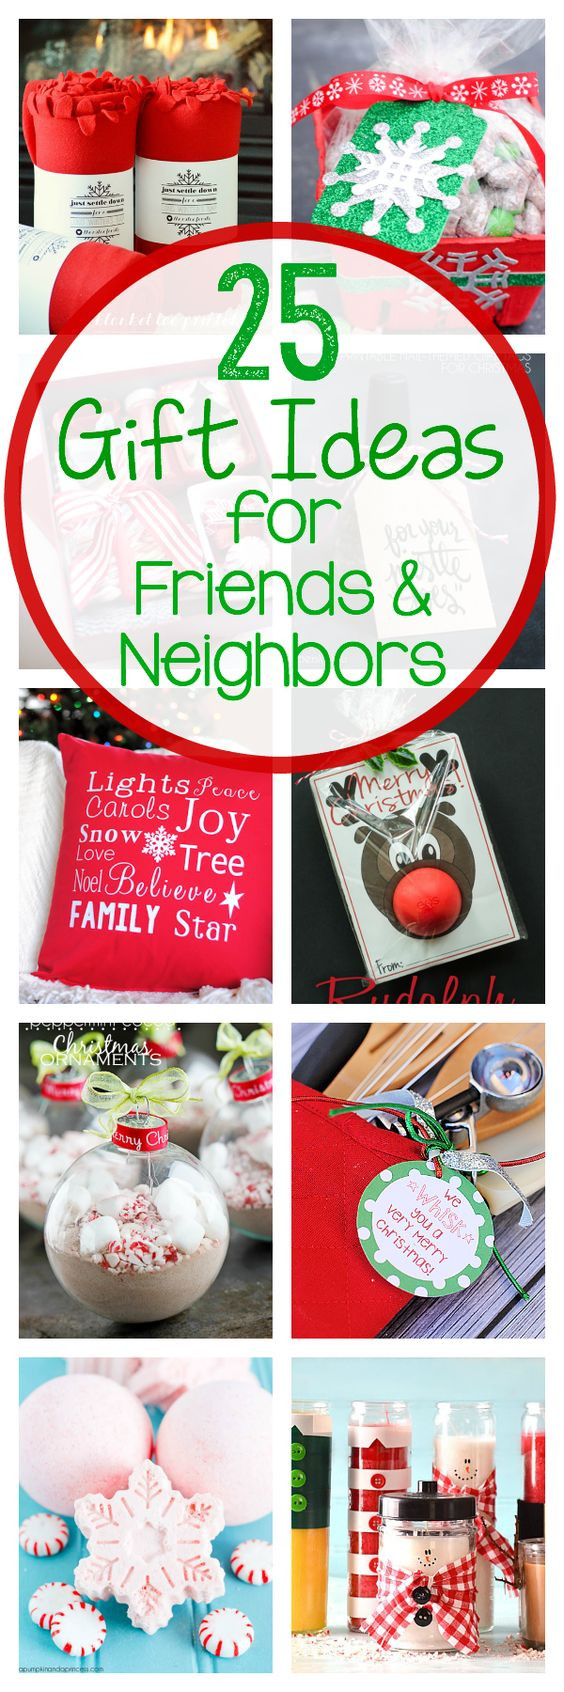 Cute Christmas Gift Ideas For Friends
 25 Gift Ideas for Friends & Neighbors